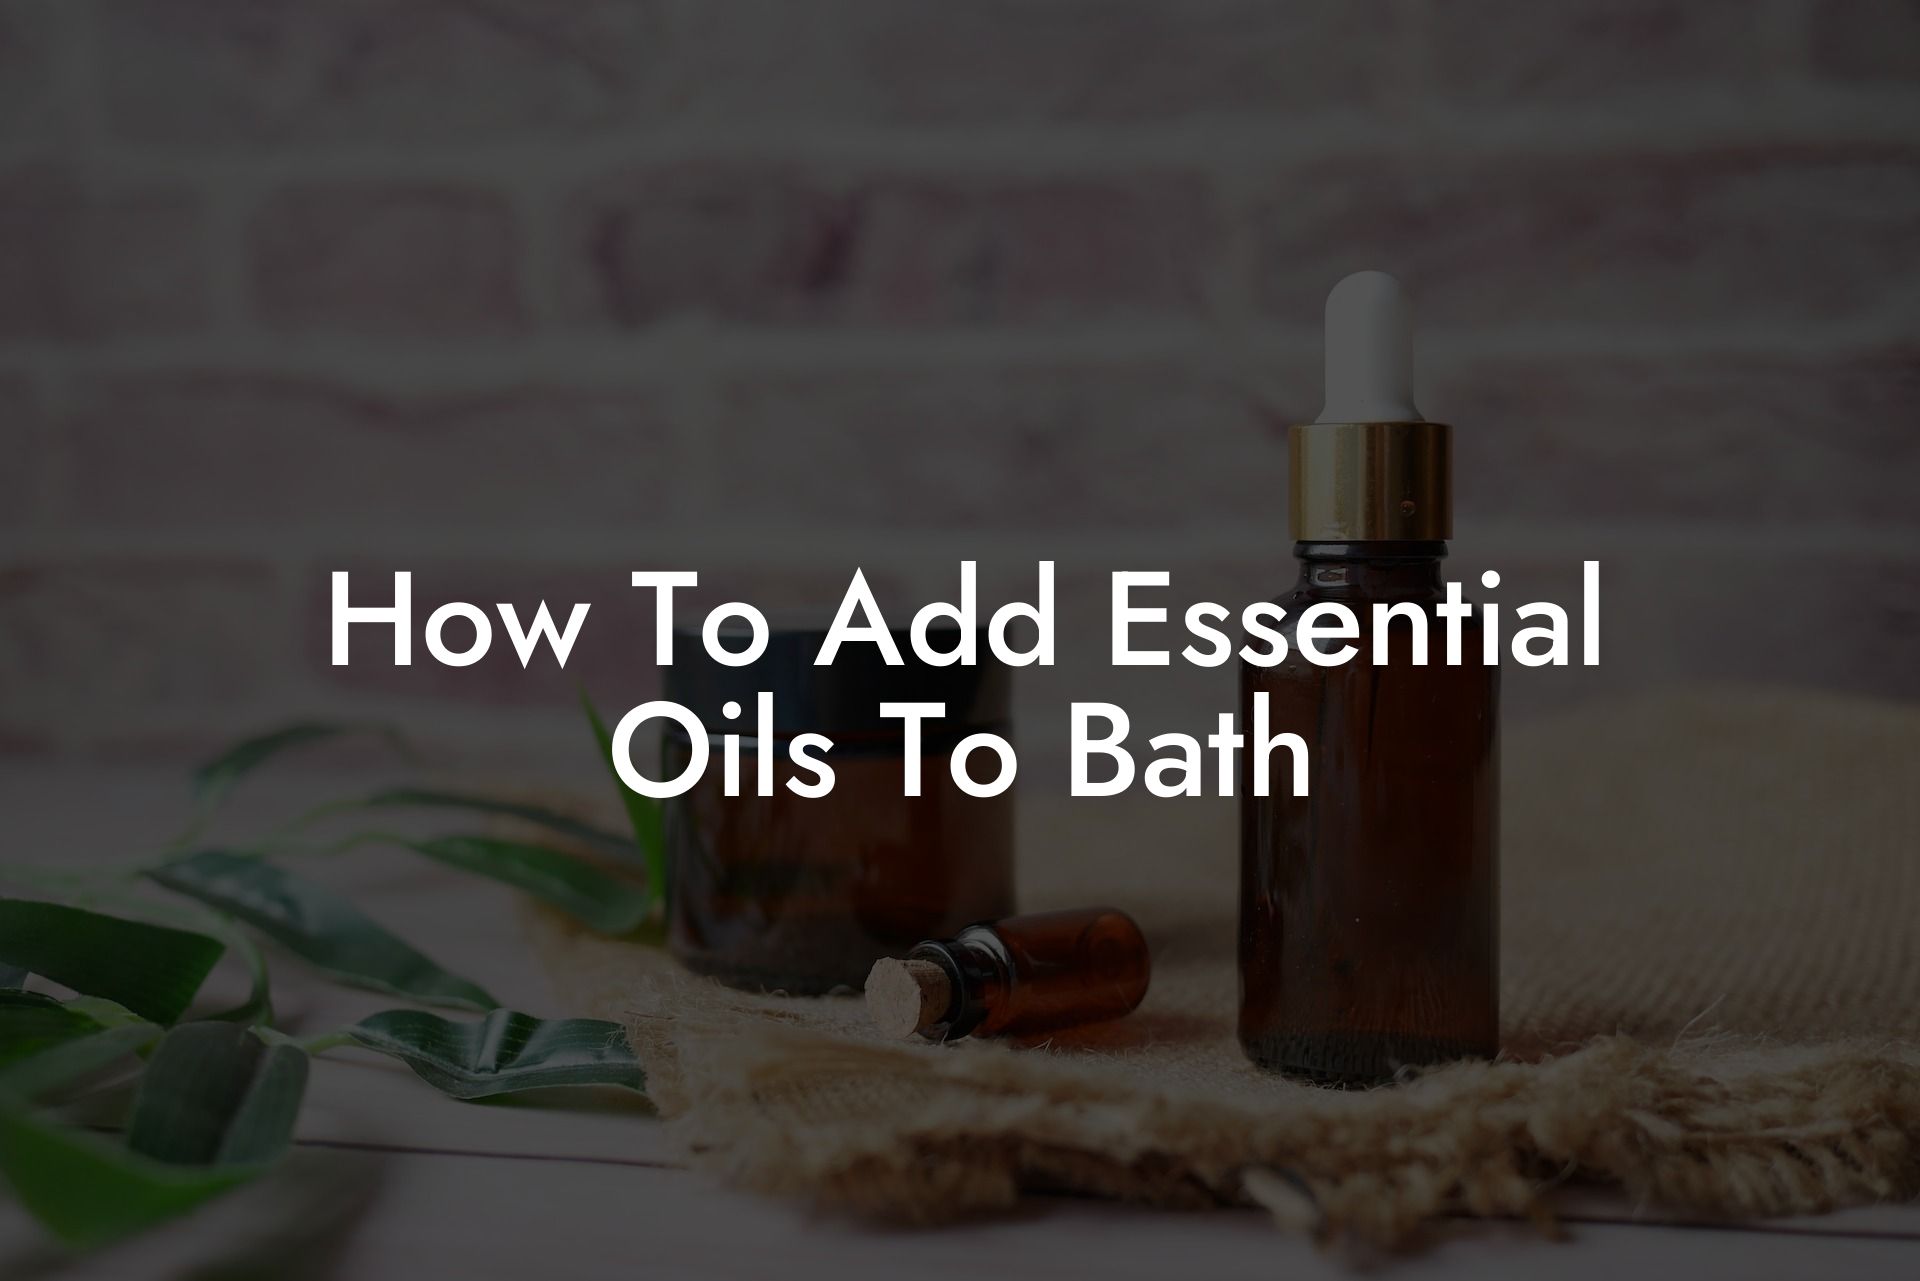 How To Add Essential Oils To Bath